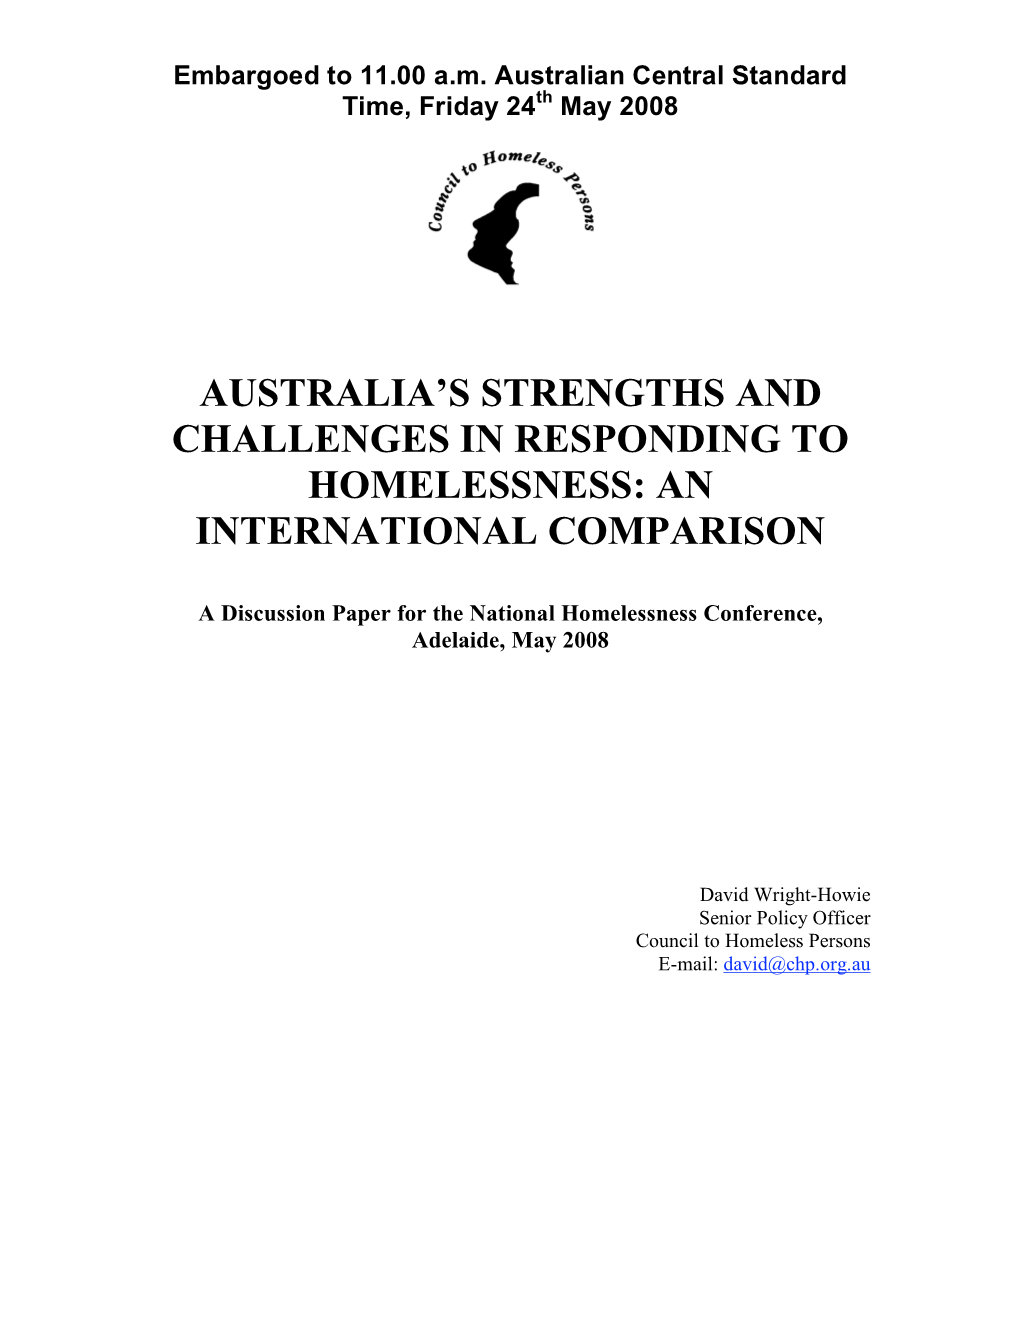 Australia's Strengths and Challenges In